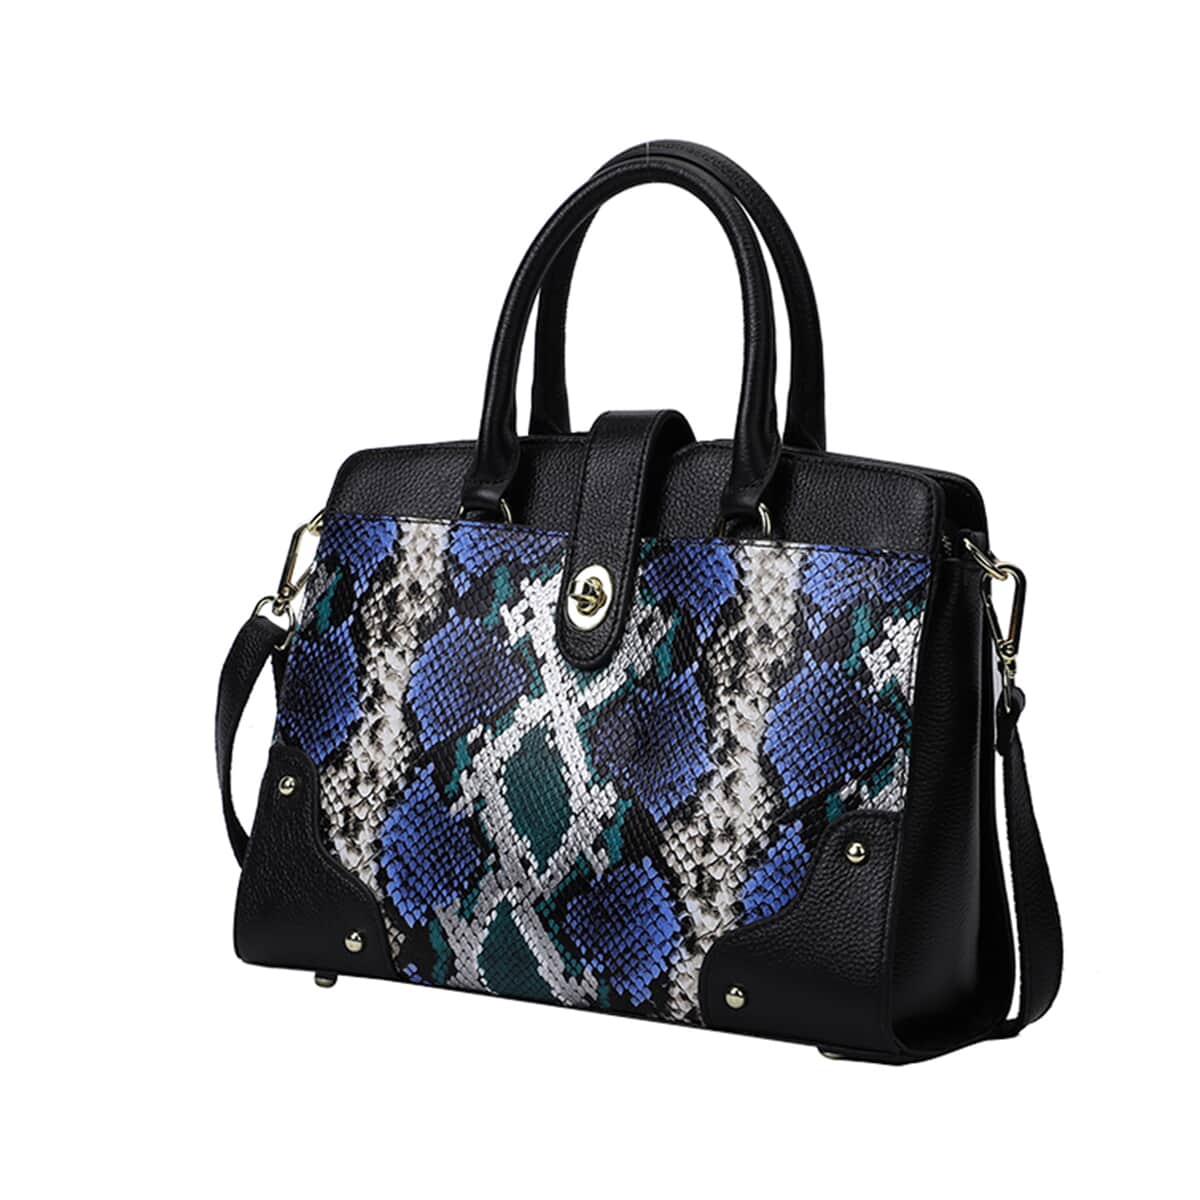 Hong Kong Closeout Collection Black, Blue & Green Snake Print Genuine Leather Convertible Bag (12.6"x4.72"x9.06") image number 6